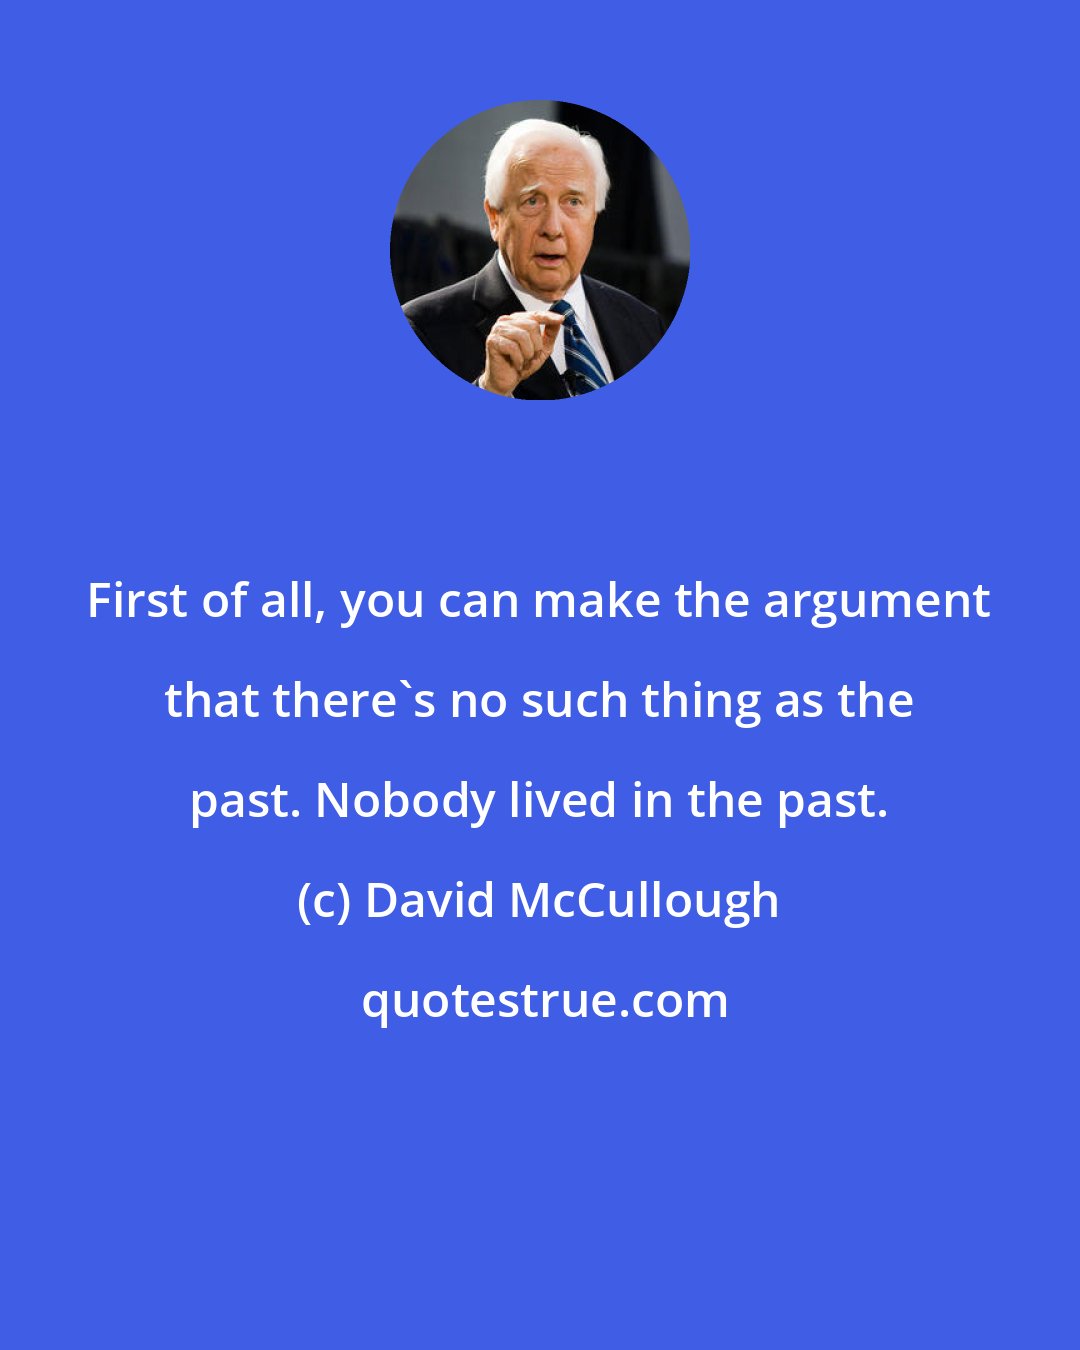 David McCullough: First of all, you can make the argument that there's no such thing as the past. Nobody lived in the past.